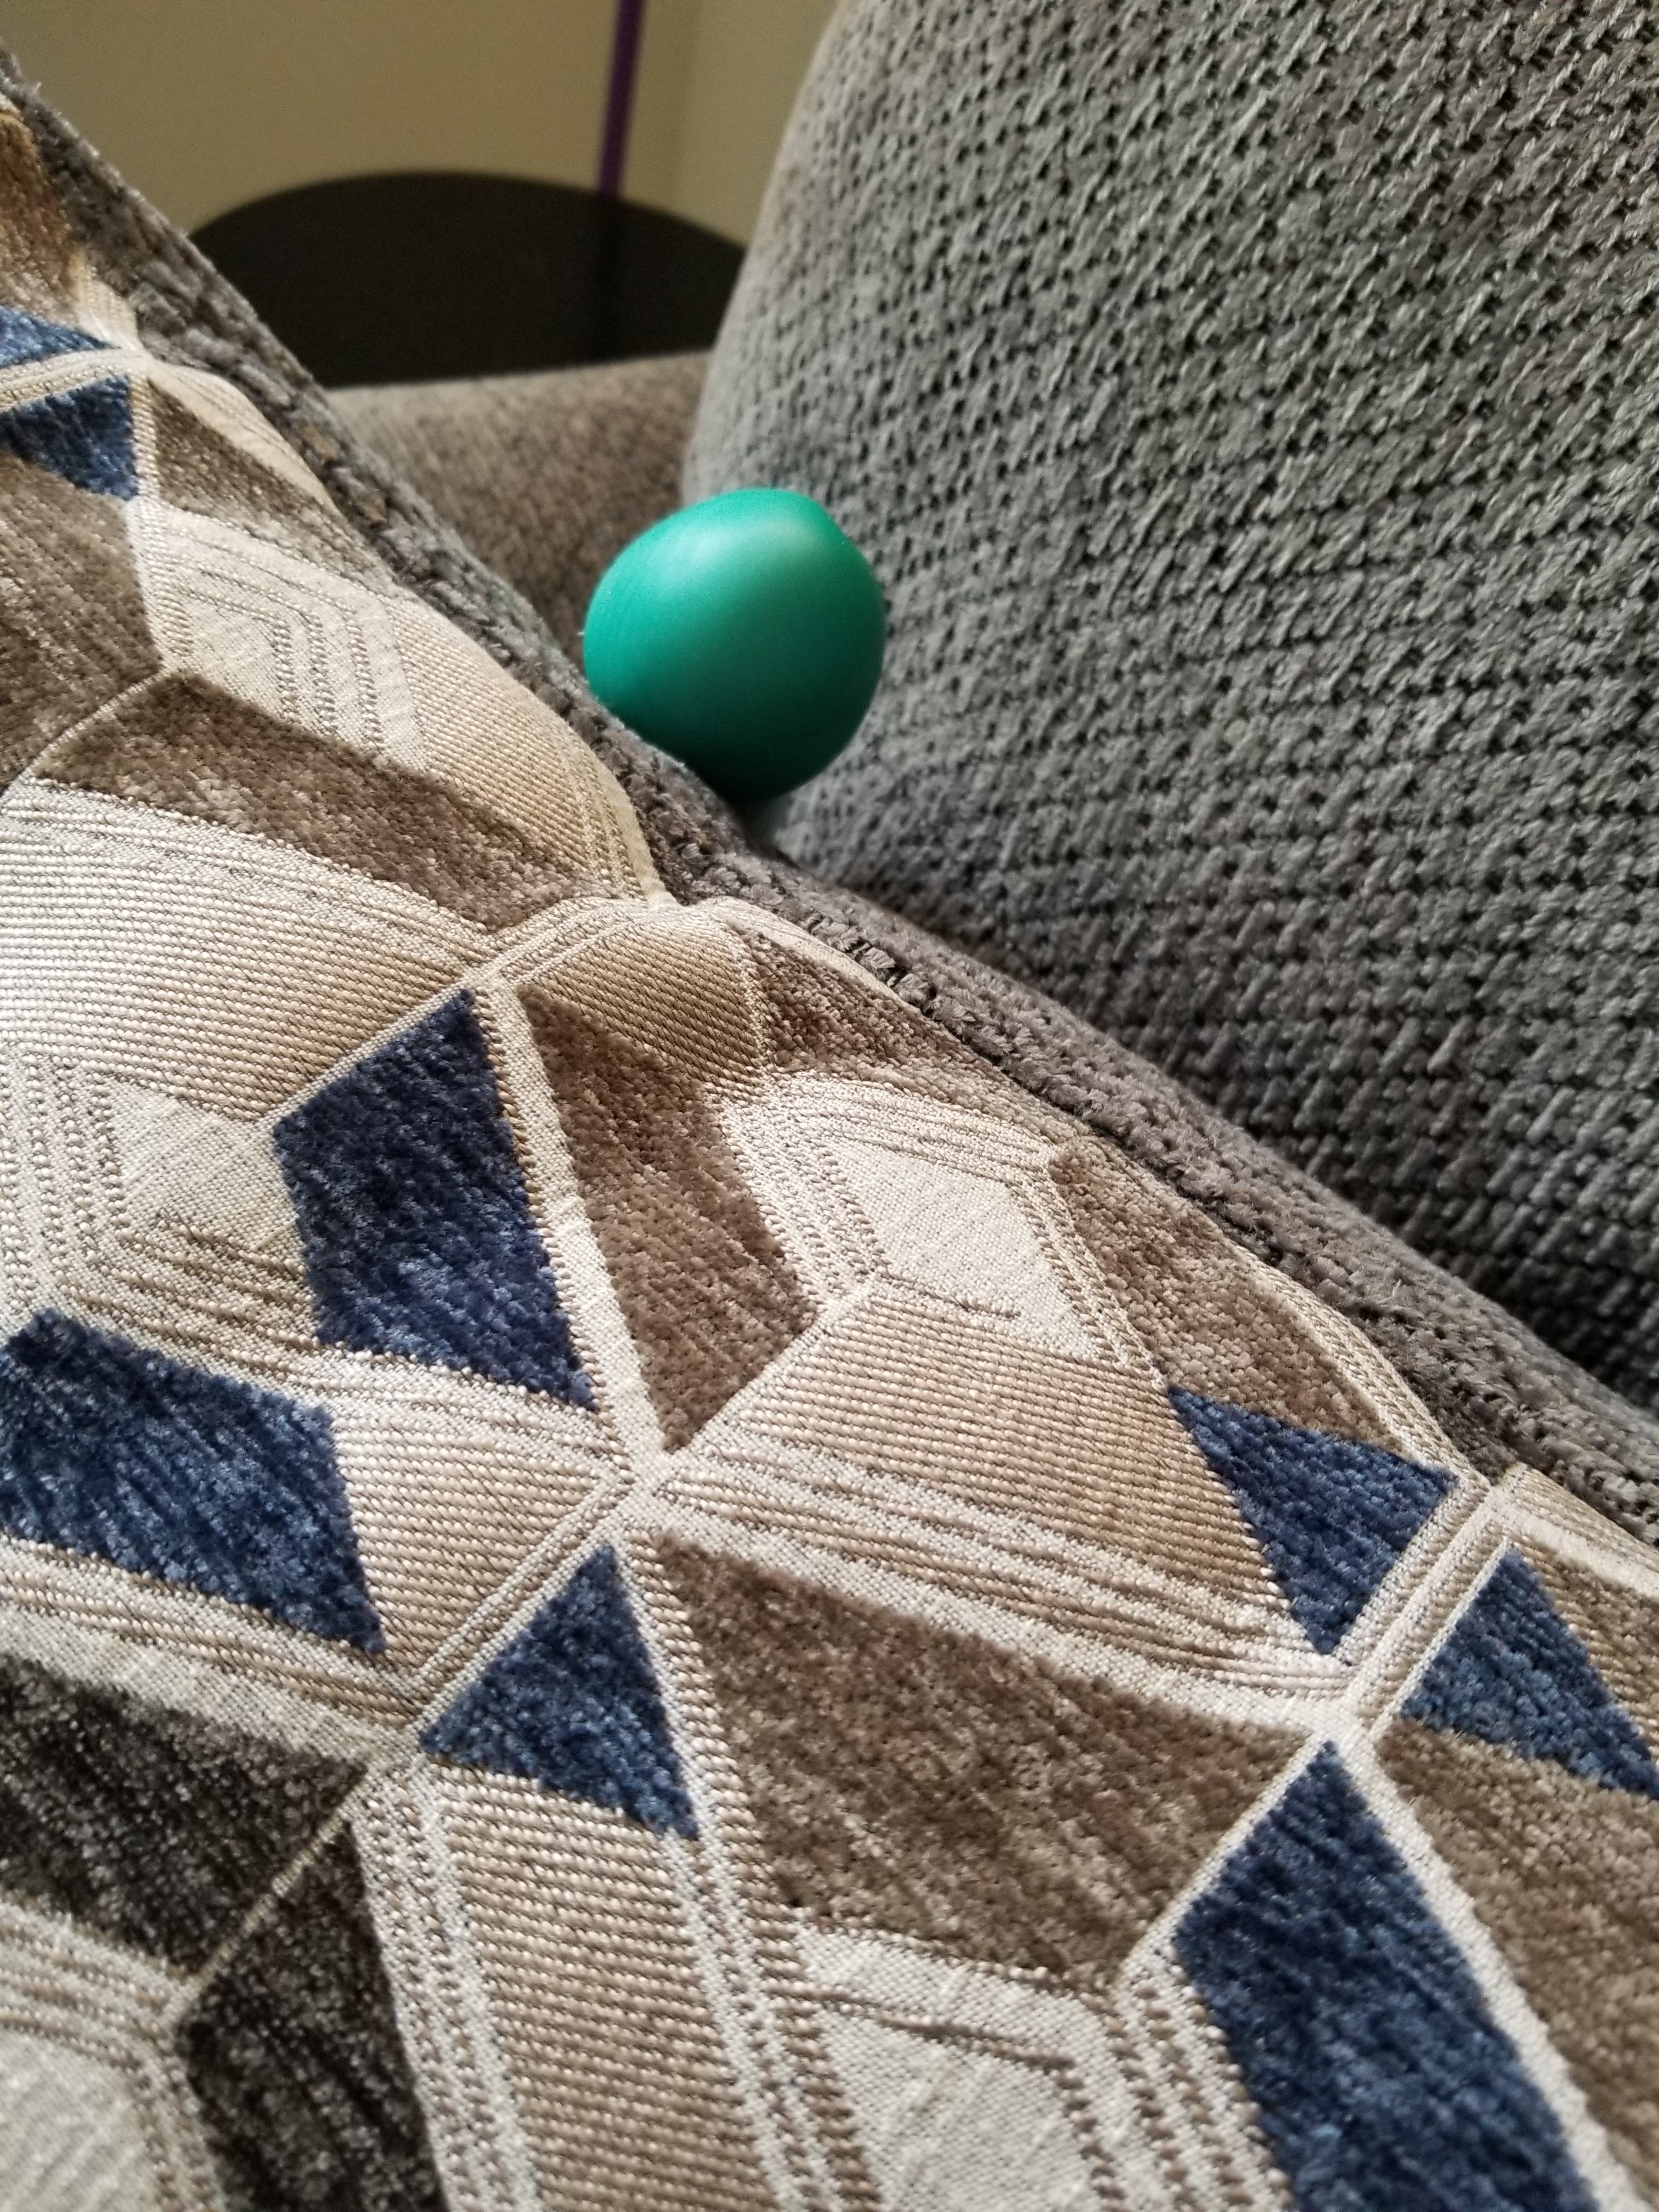 Big Blue hiding behind a pillow on the couch